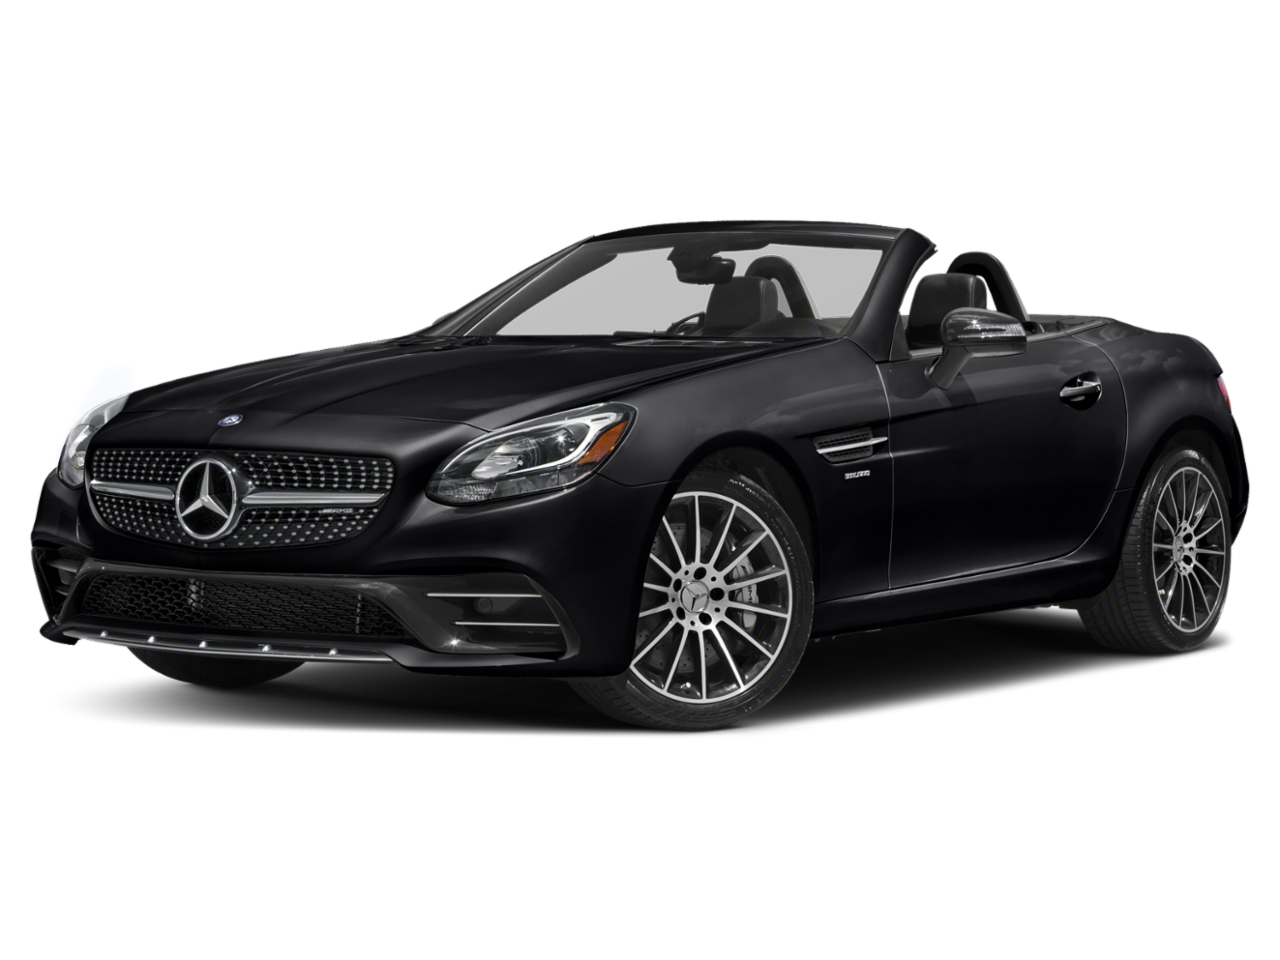 Mercedes-Benz SLC43 AMG Repair: Service and Maintenance Cost